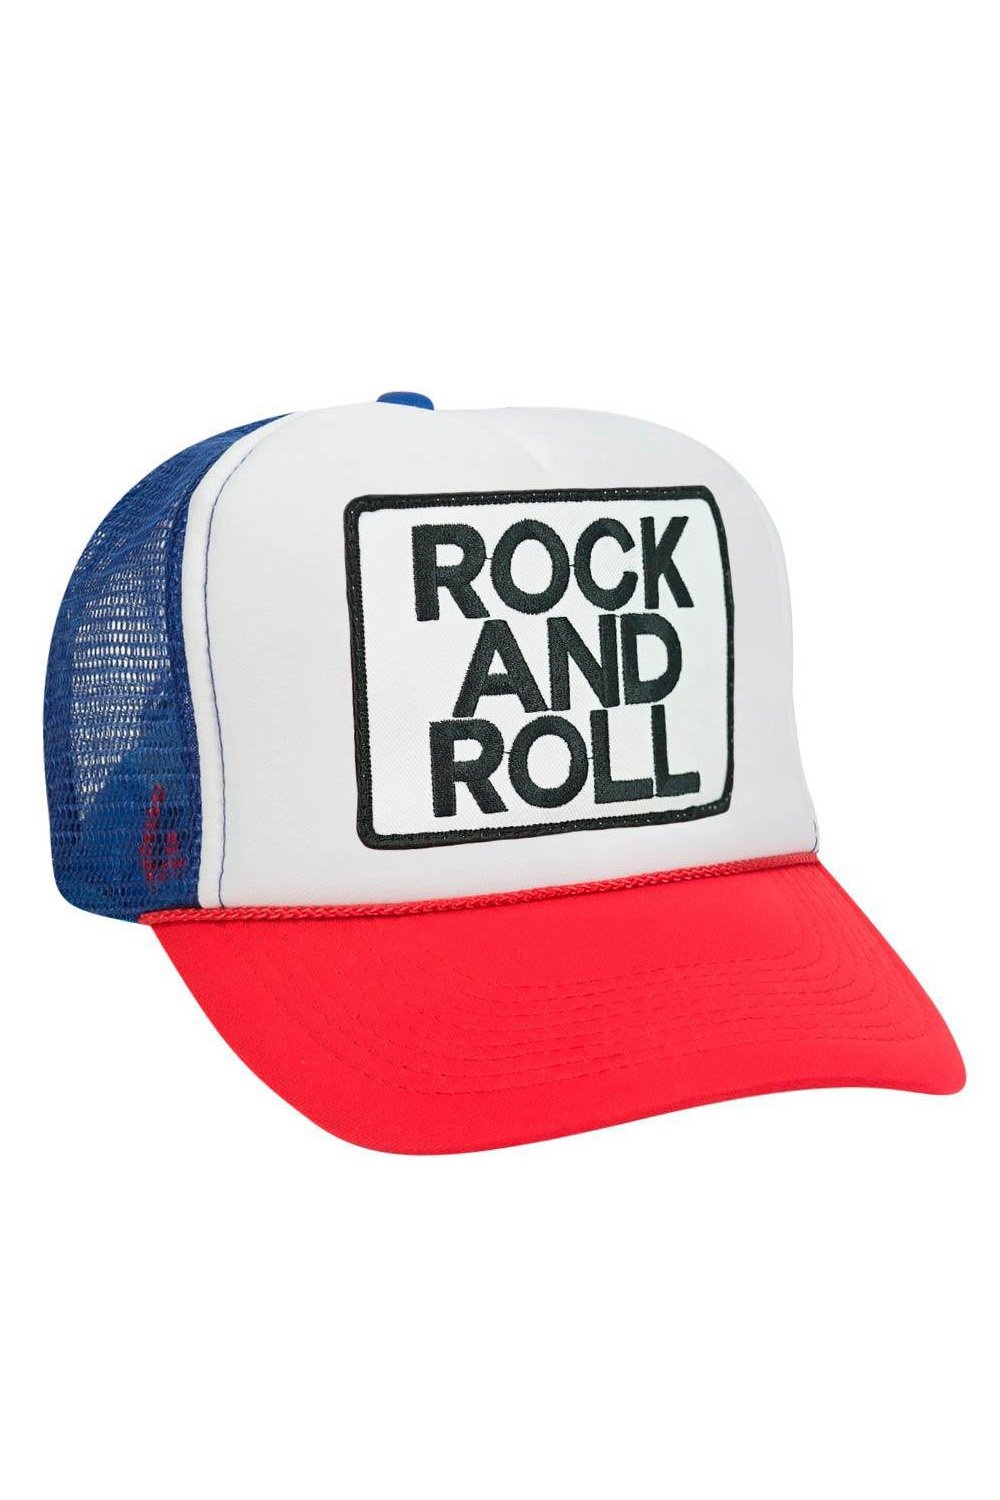 ROCK &amp; ROLL VINTAGE TRUCKER HAT HATS Aviator Nation OS RED/WHITE/ROYAL 